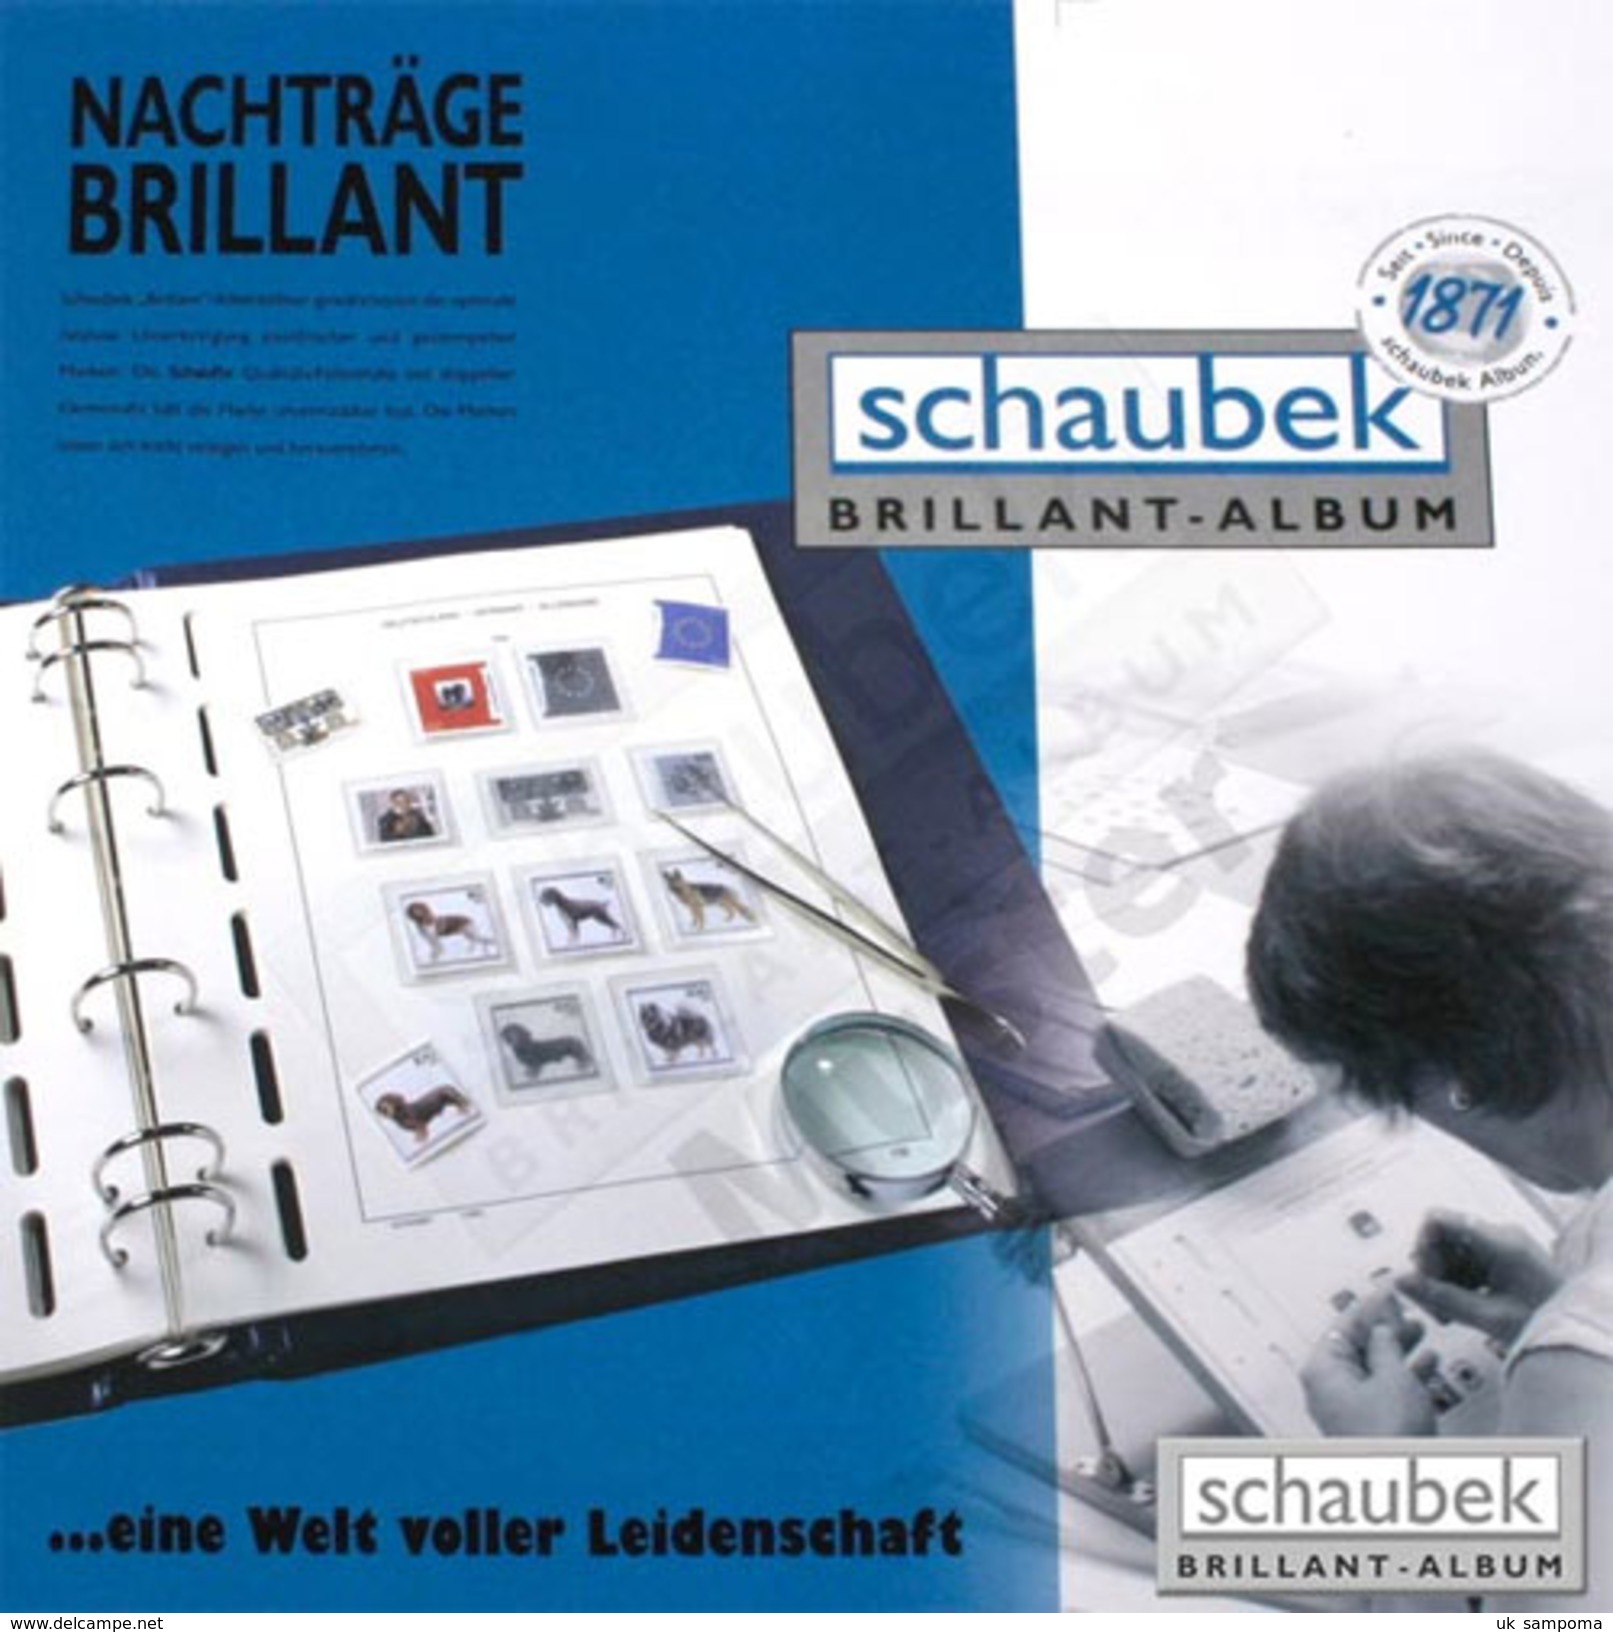 Schaubek A-815/03B Album Malta 2010-2014 Brillant, In A Blue Screw Post Binder, Vol. III Without Slipcase - Binders With Pages